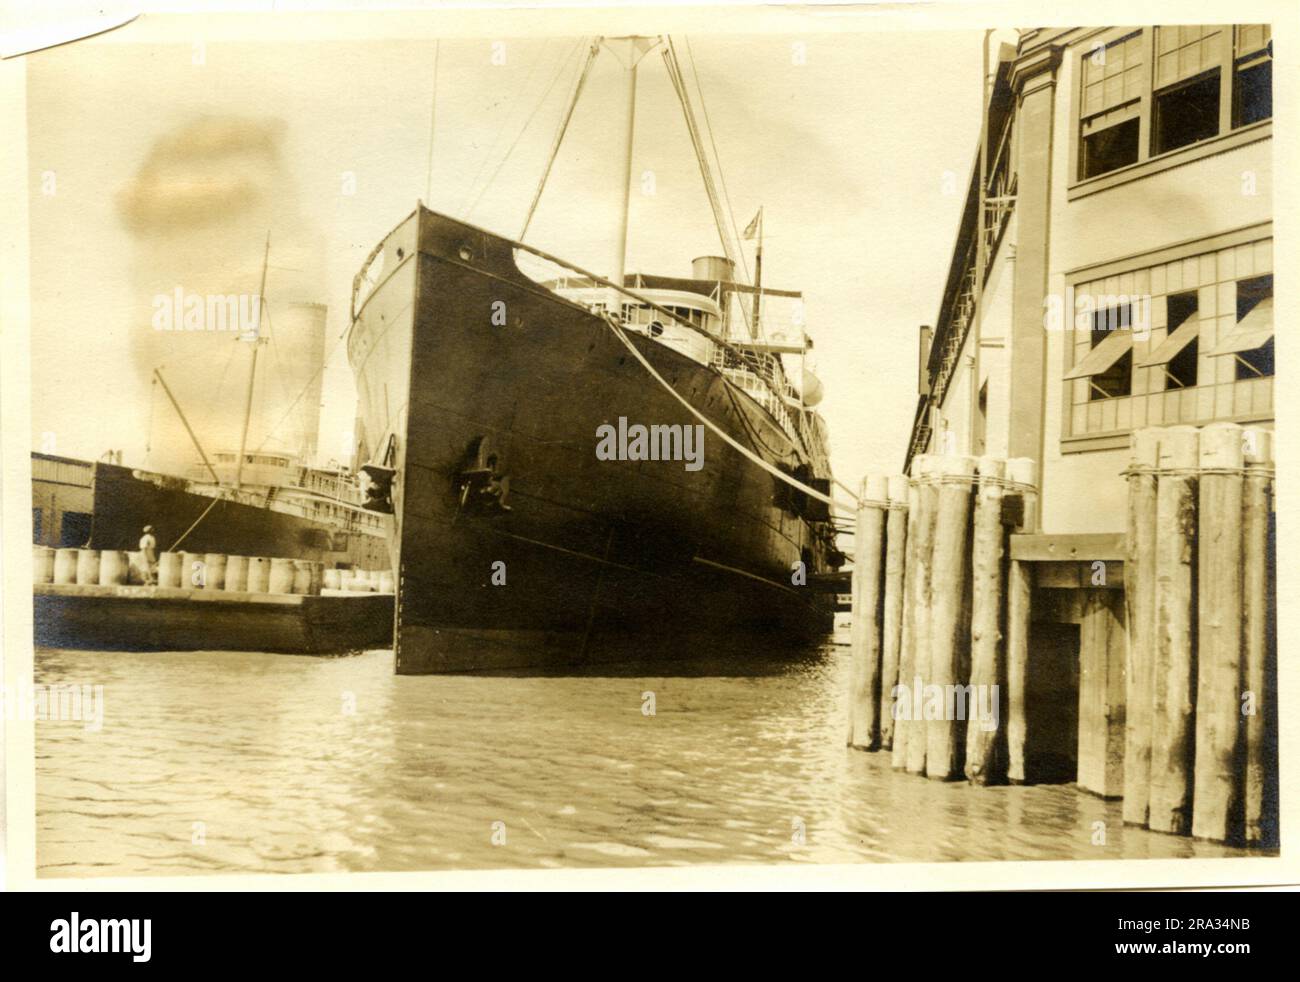 Photograph of the Port View of the SS City of St. Louis. Port View. Date: - July 19, 1918. Photograph Of: - S. S. City Of St Louis. Nationality: - American. Tonnage: - 5425. Captain: - L. Dalzell. Owners: - Ocean S. S. Co. Where From: - Boston, Mass. Destination: - Boston, Mass. Where Photographed: - Savannah, GA. Sixth Naval District. By Whom Photographed: - J. B. Dearborn. Date Photographed: - July 13th., 1918.. 1918-07-13T00:00:00. Stock Photo